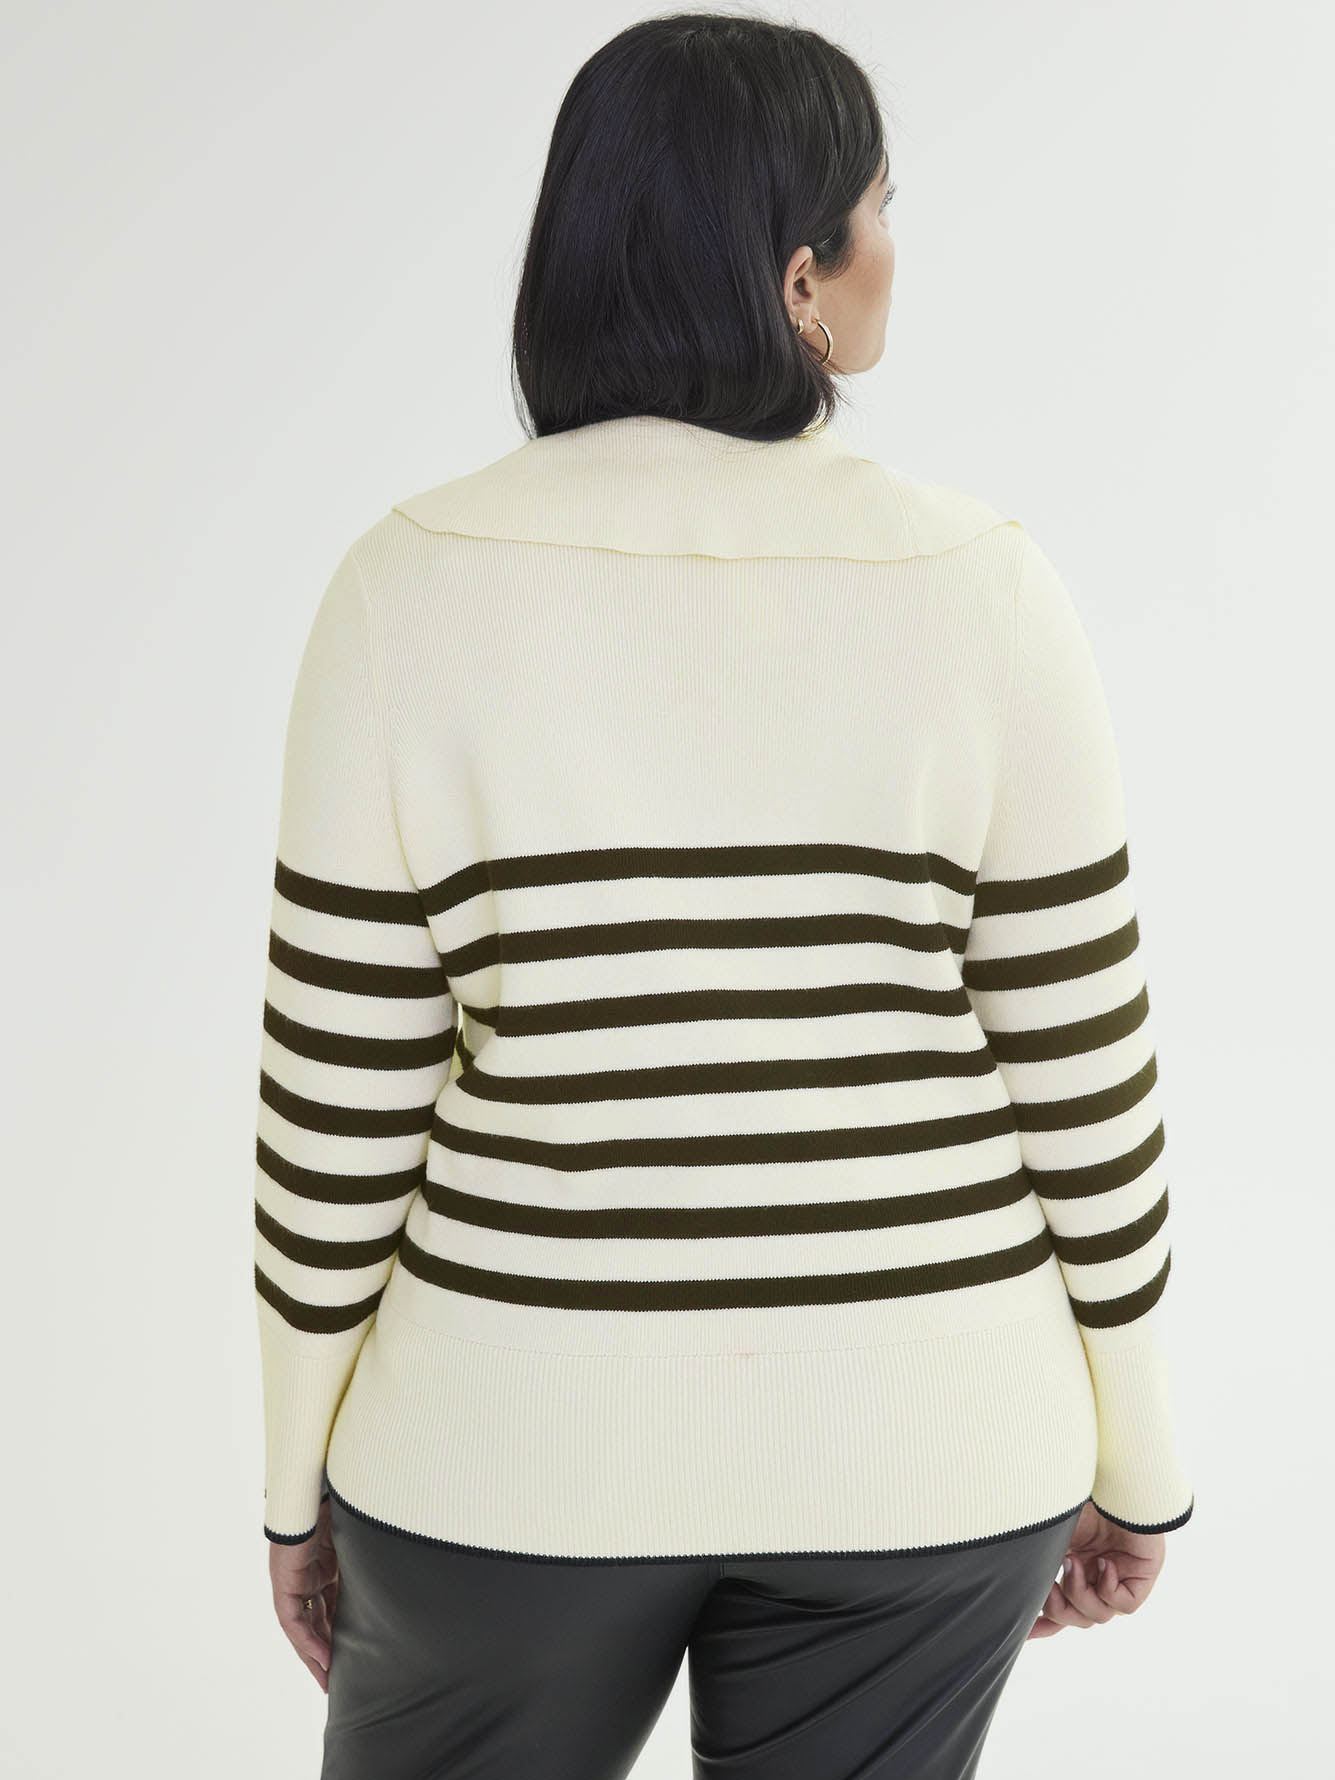 Stripe Sweater with Long Bell Sleeves - Addition Elle